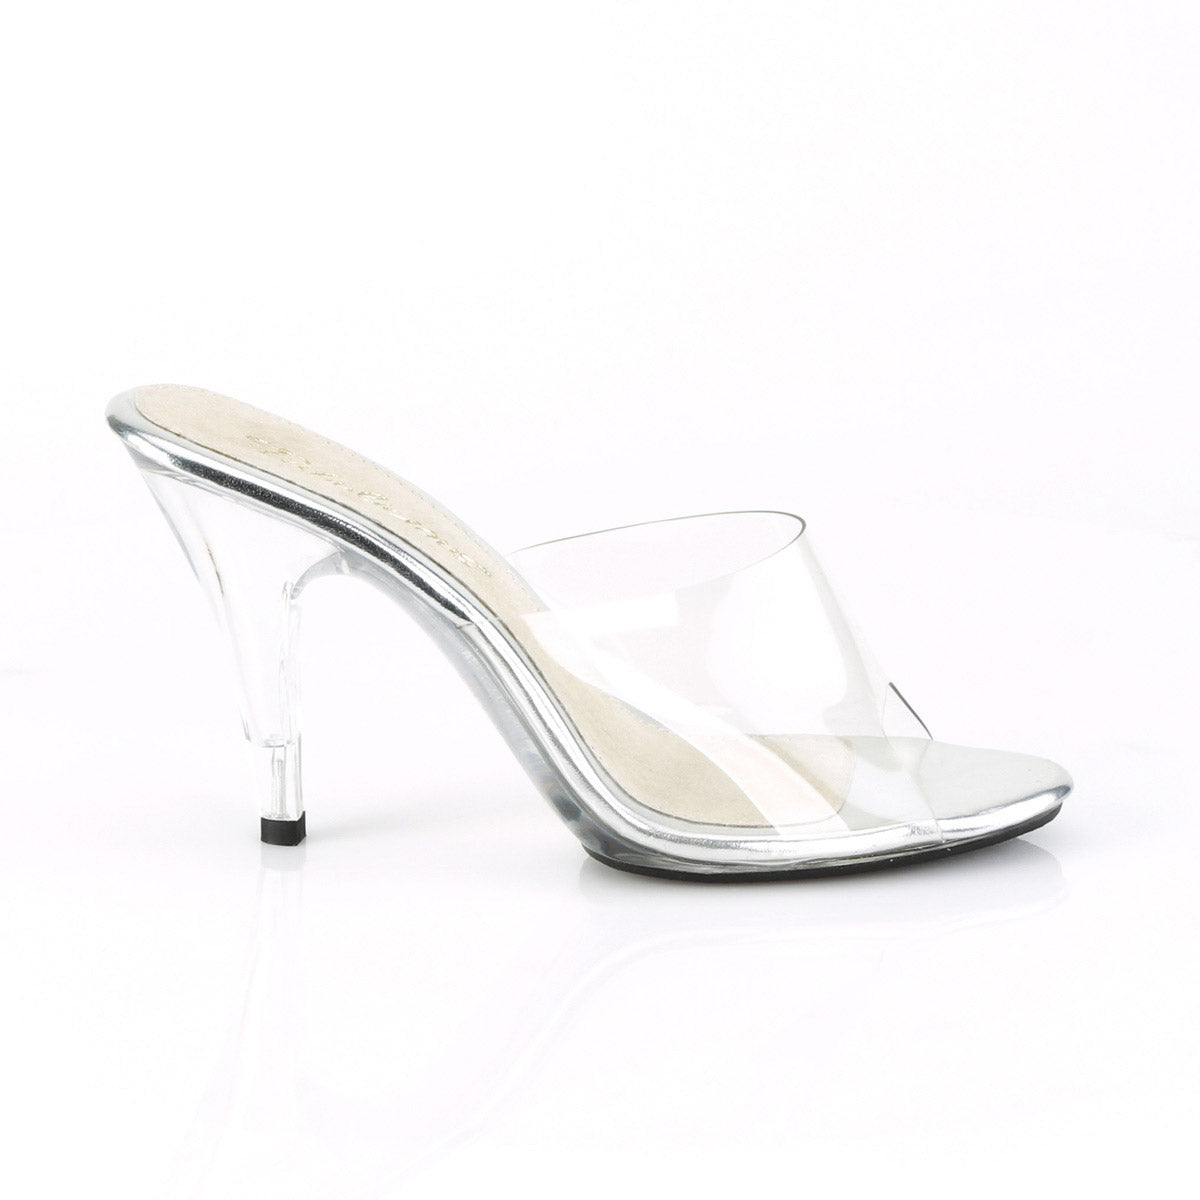 Sexy Casual Slipper Clear Stiletto Slip On Mules High Heels Shoes Pleaser Fabulicious CARESS/401